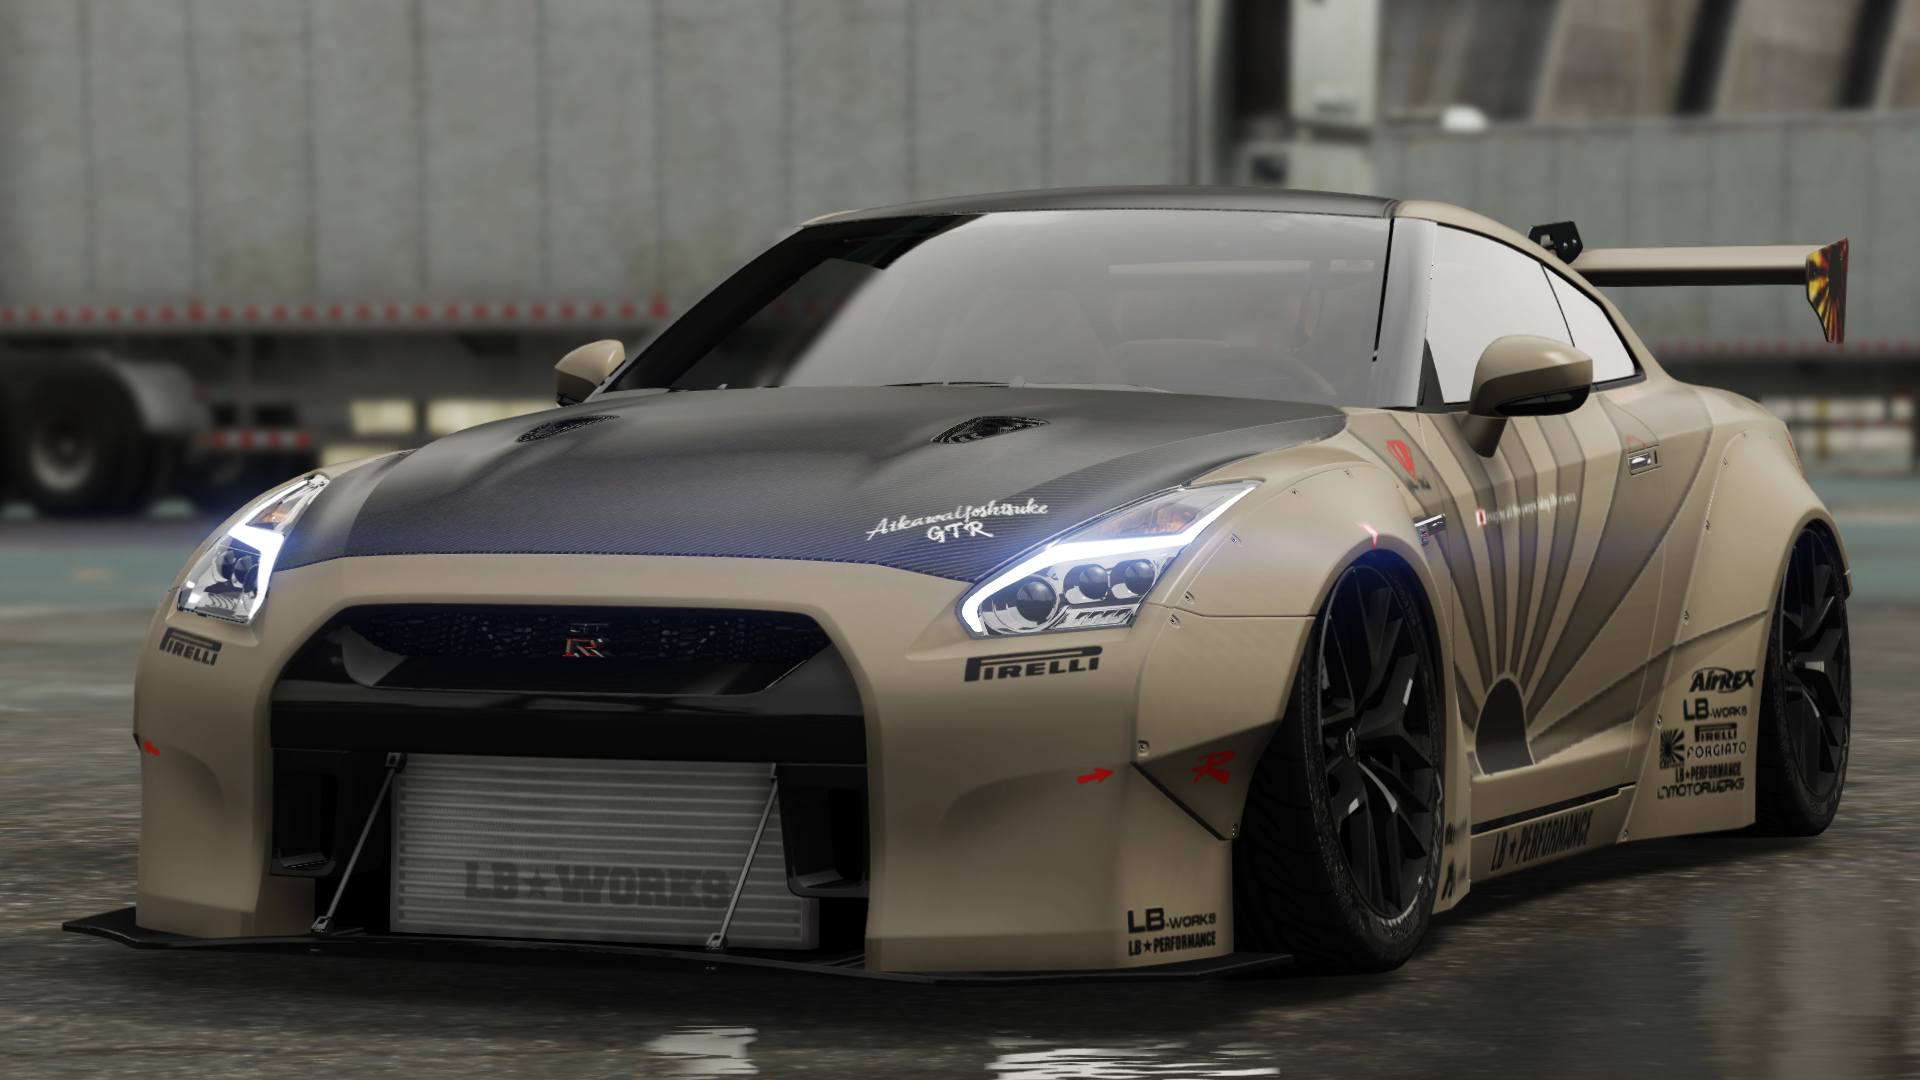 Nissan GTR (Reference from Liberty Walk)